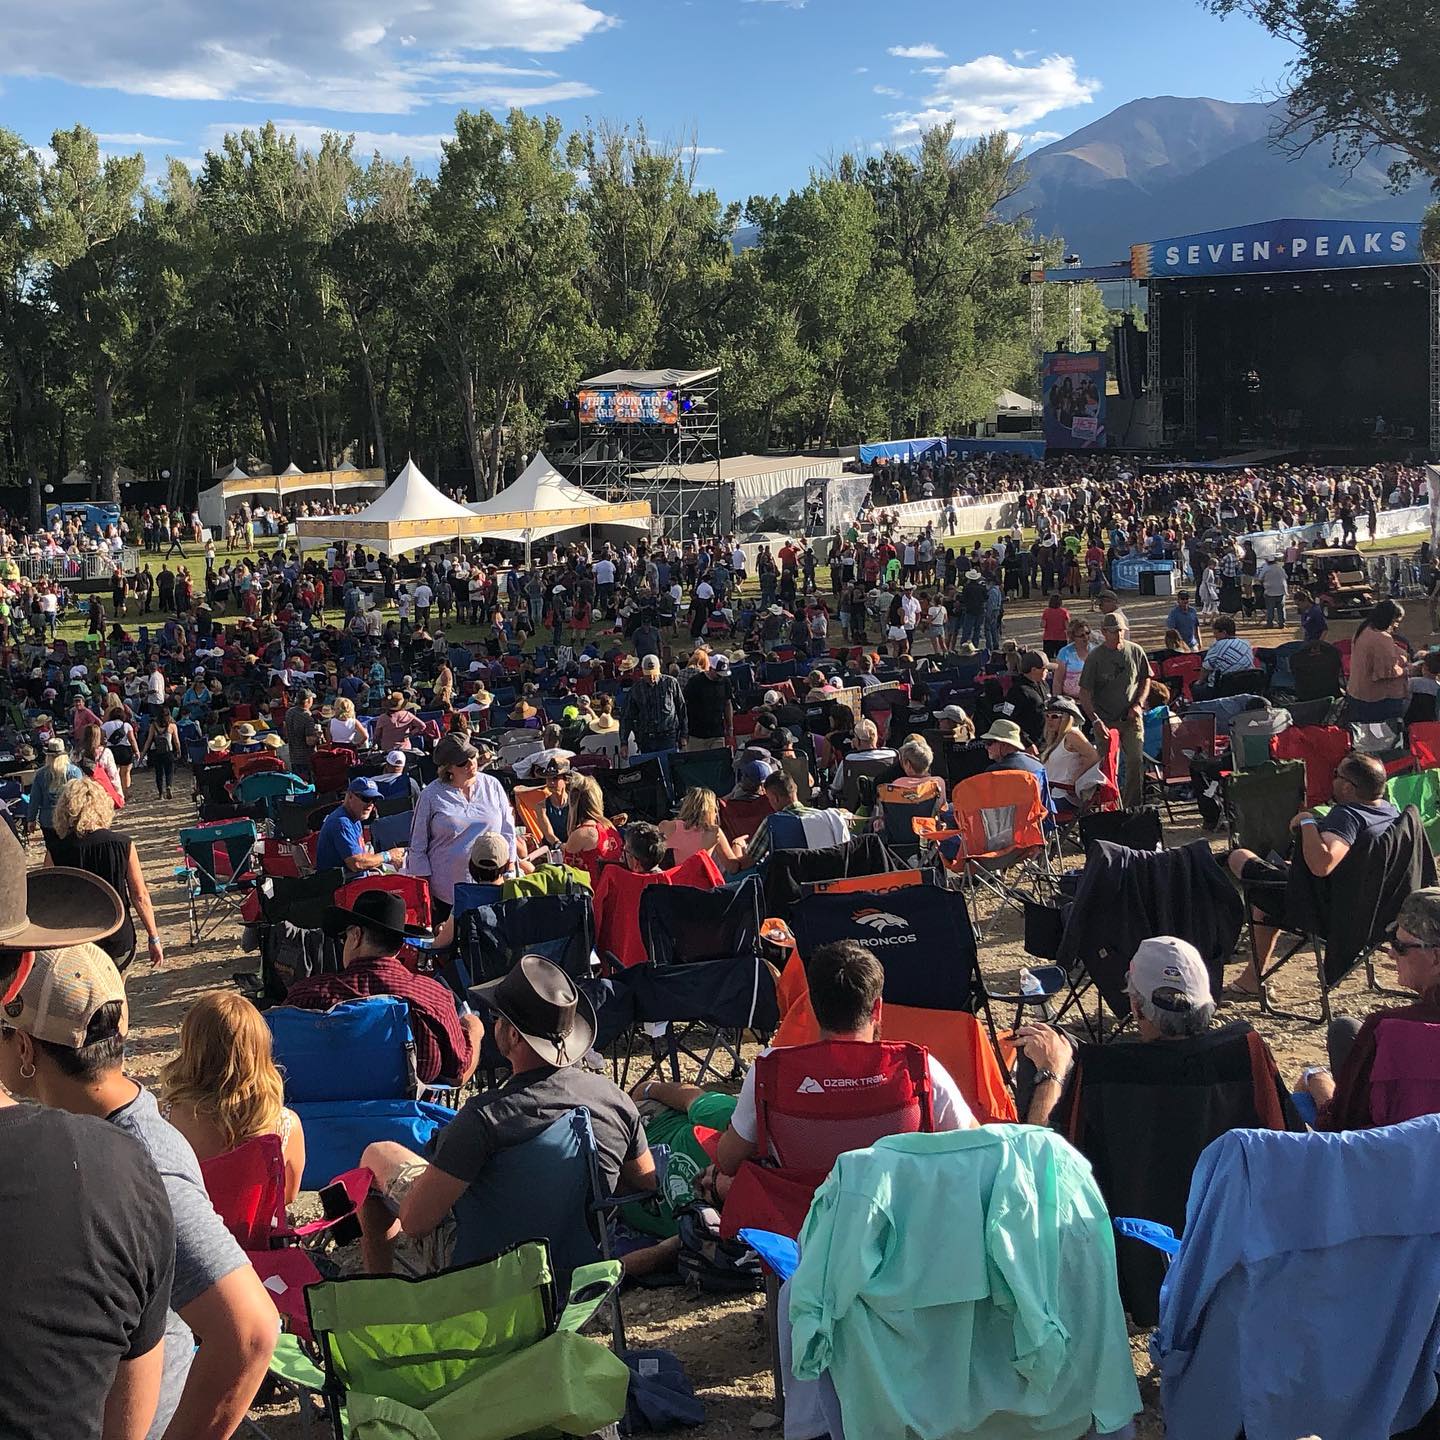 The Meadows in Buena Vista Submits Request to Host Large and Small Events